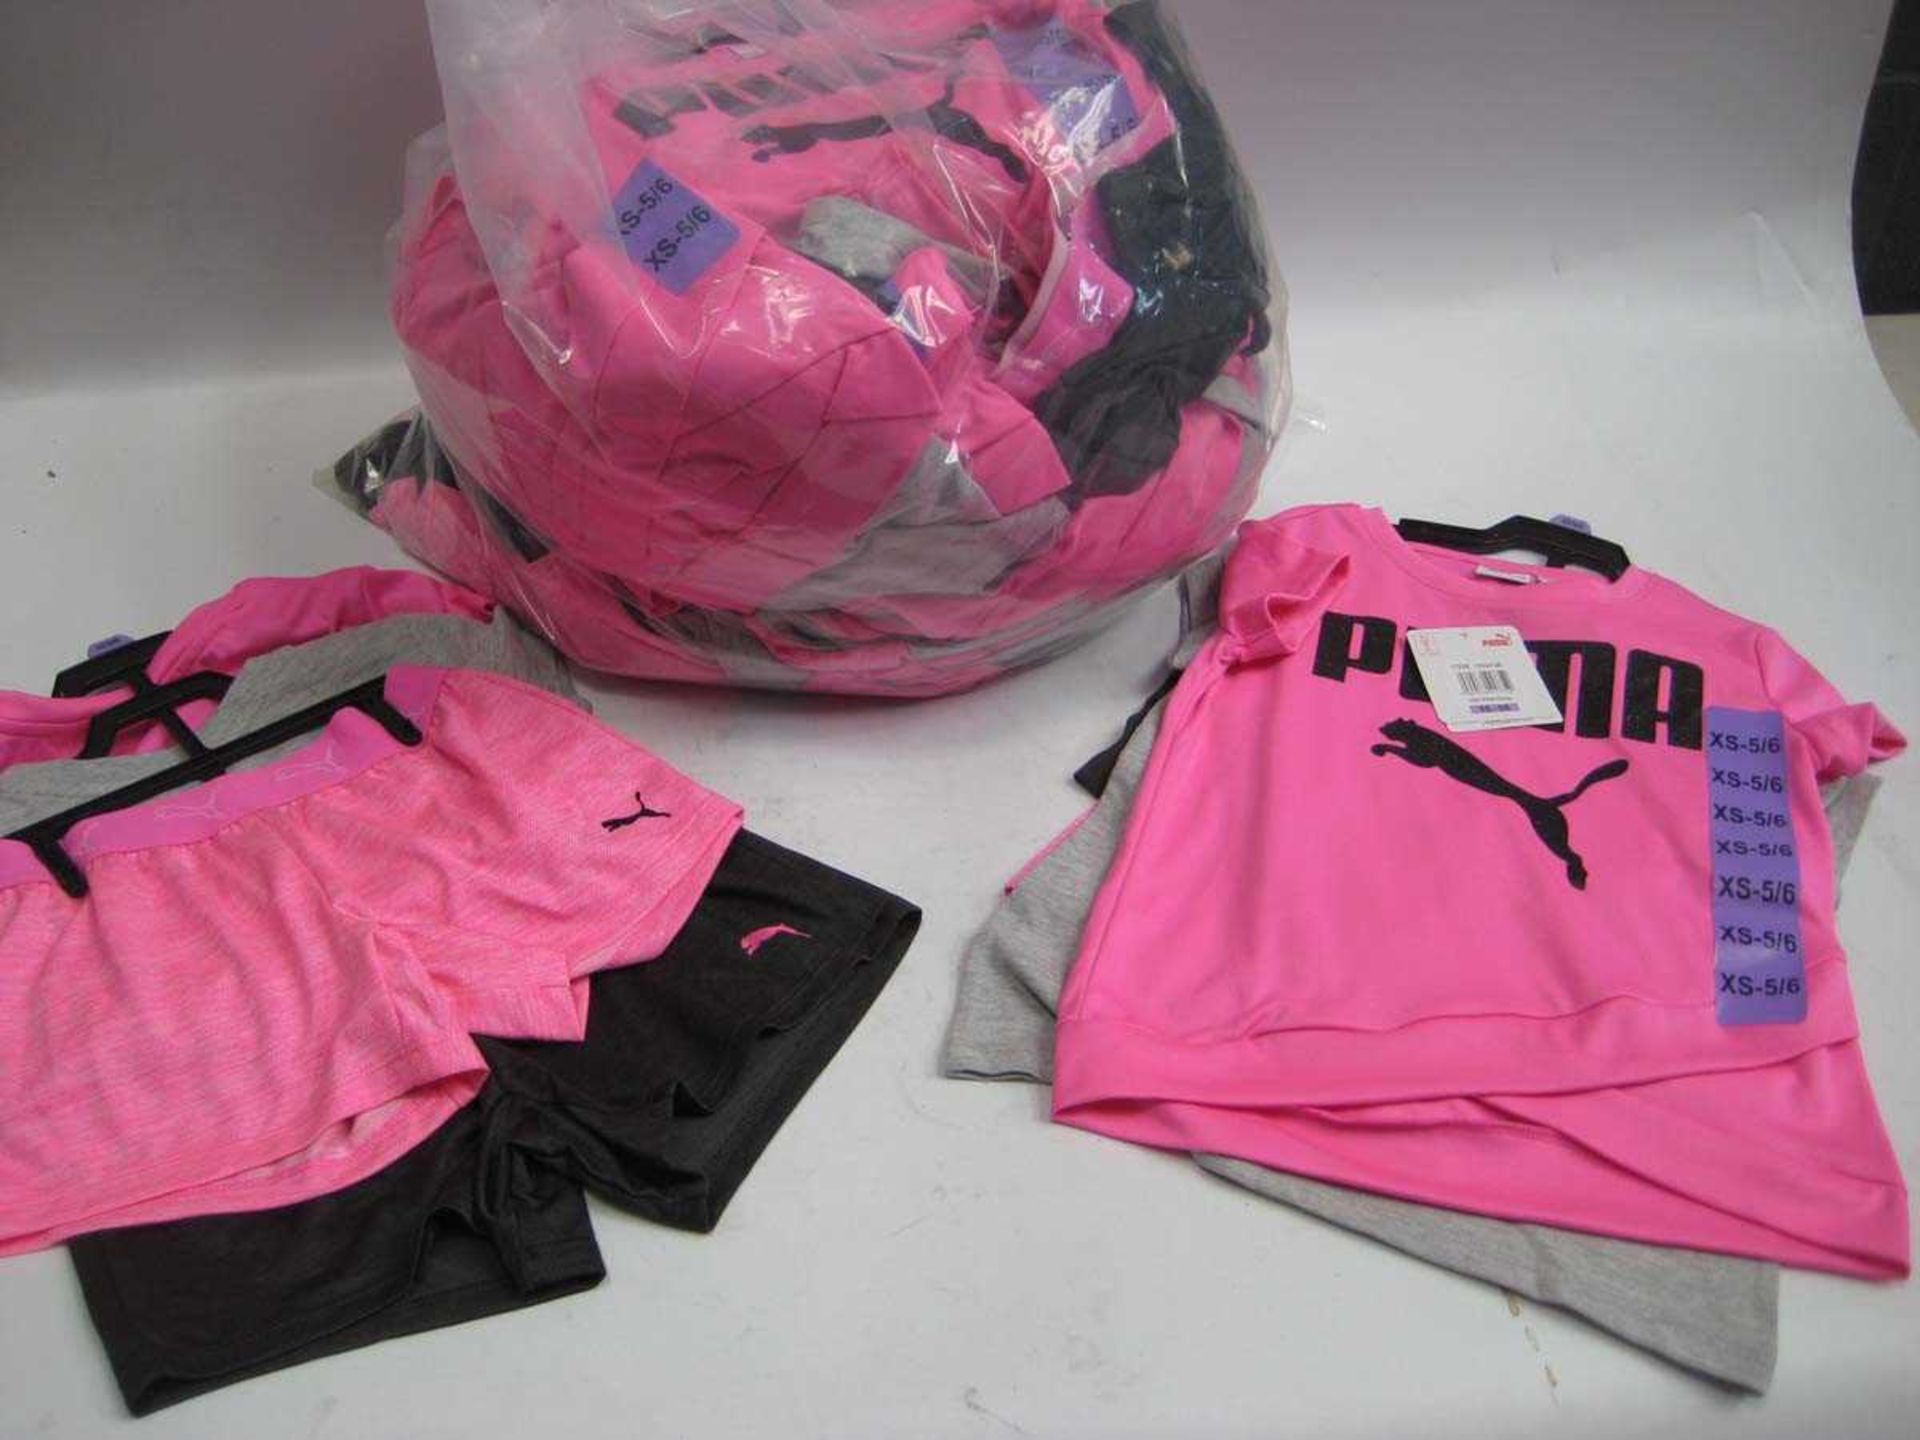 A bag containing approx. 18x sets of Girls Puma Shorts and T Shirts in various sizes.